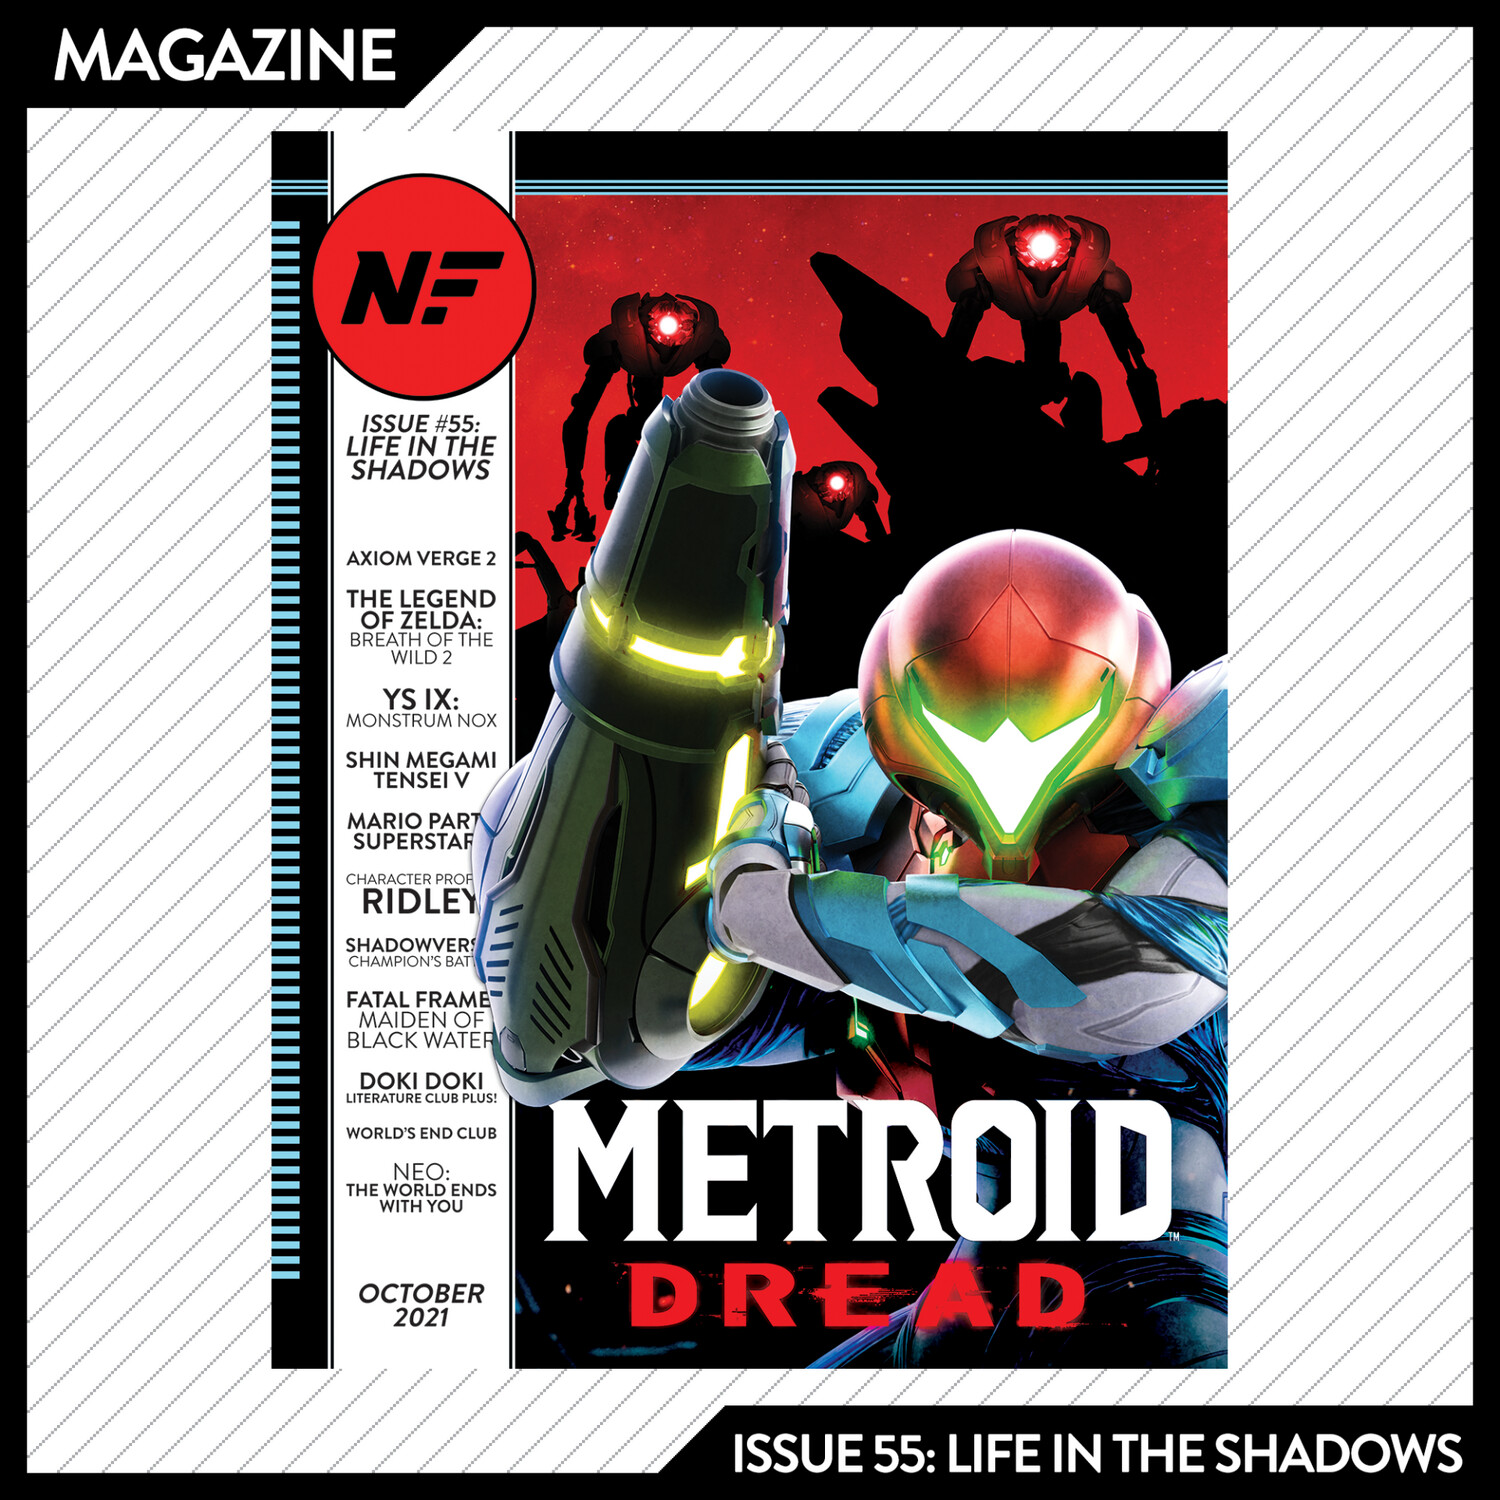 Issue #55: Life in the Shadows – October 2021